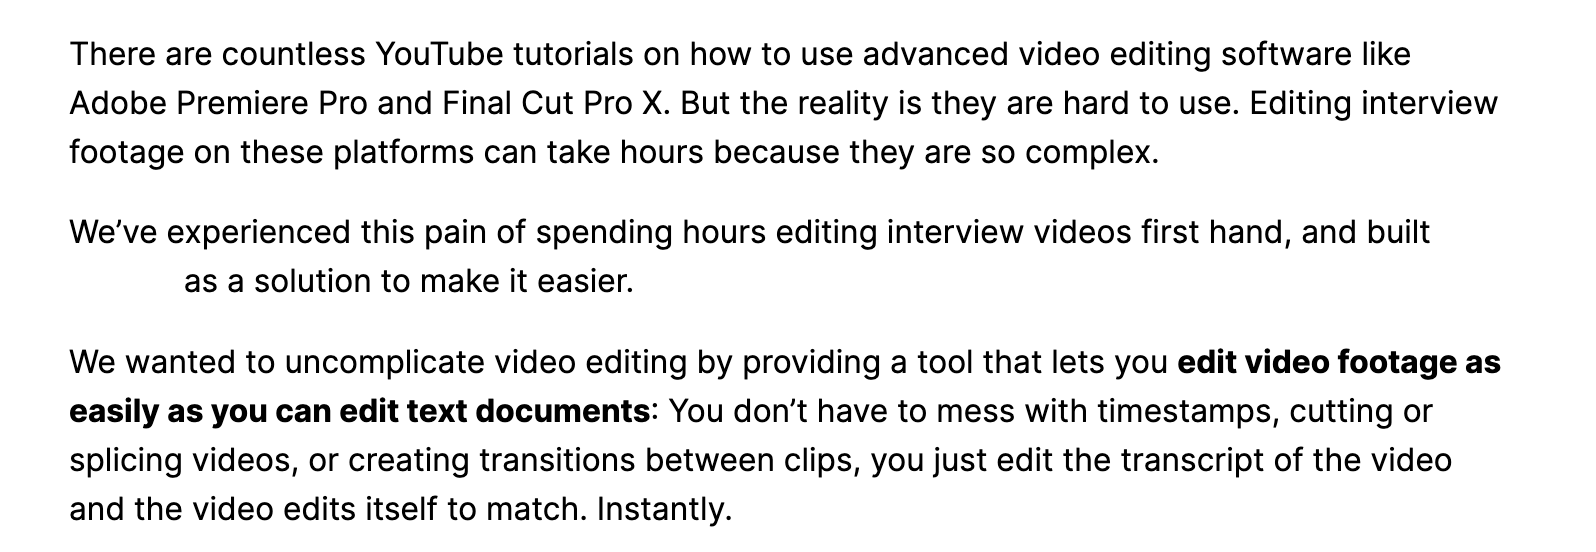 Edit video footage as easily as you can edit text documents example